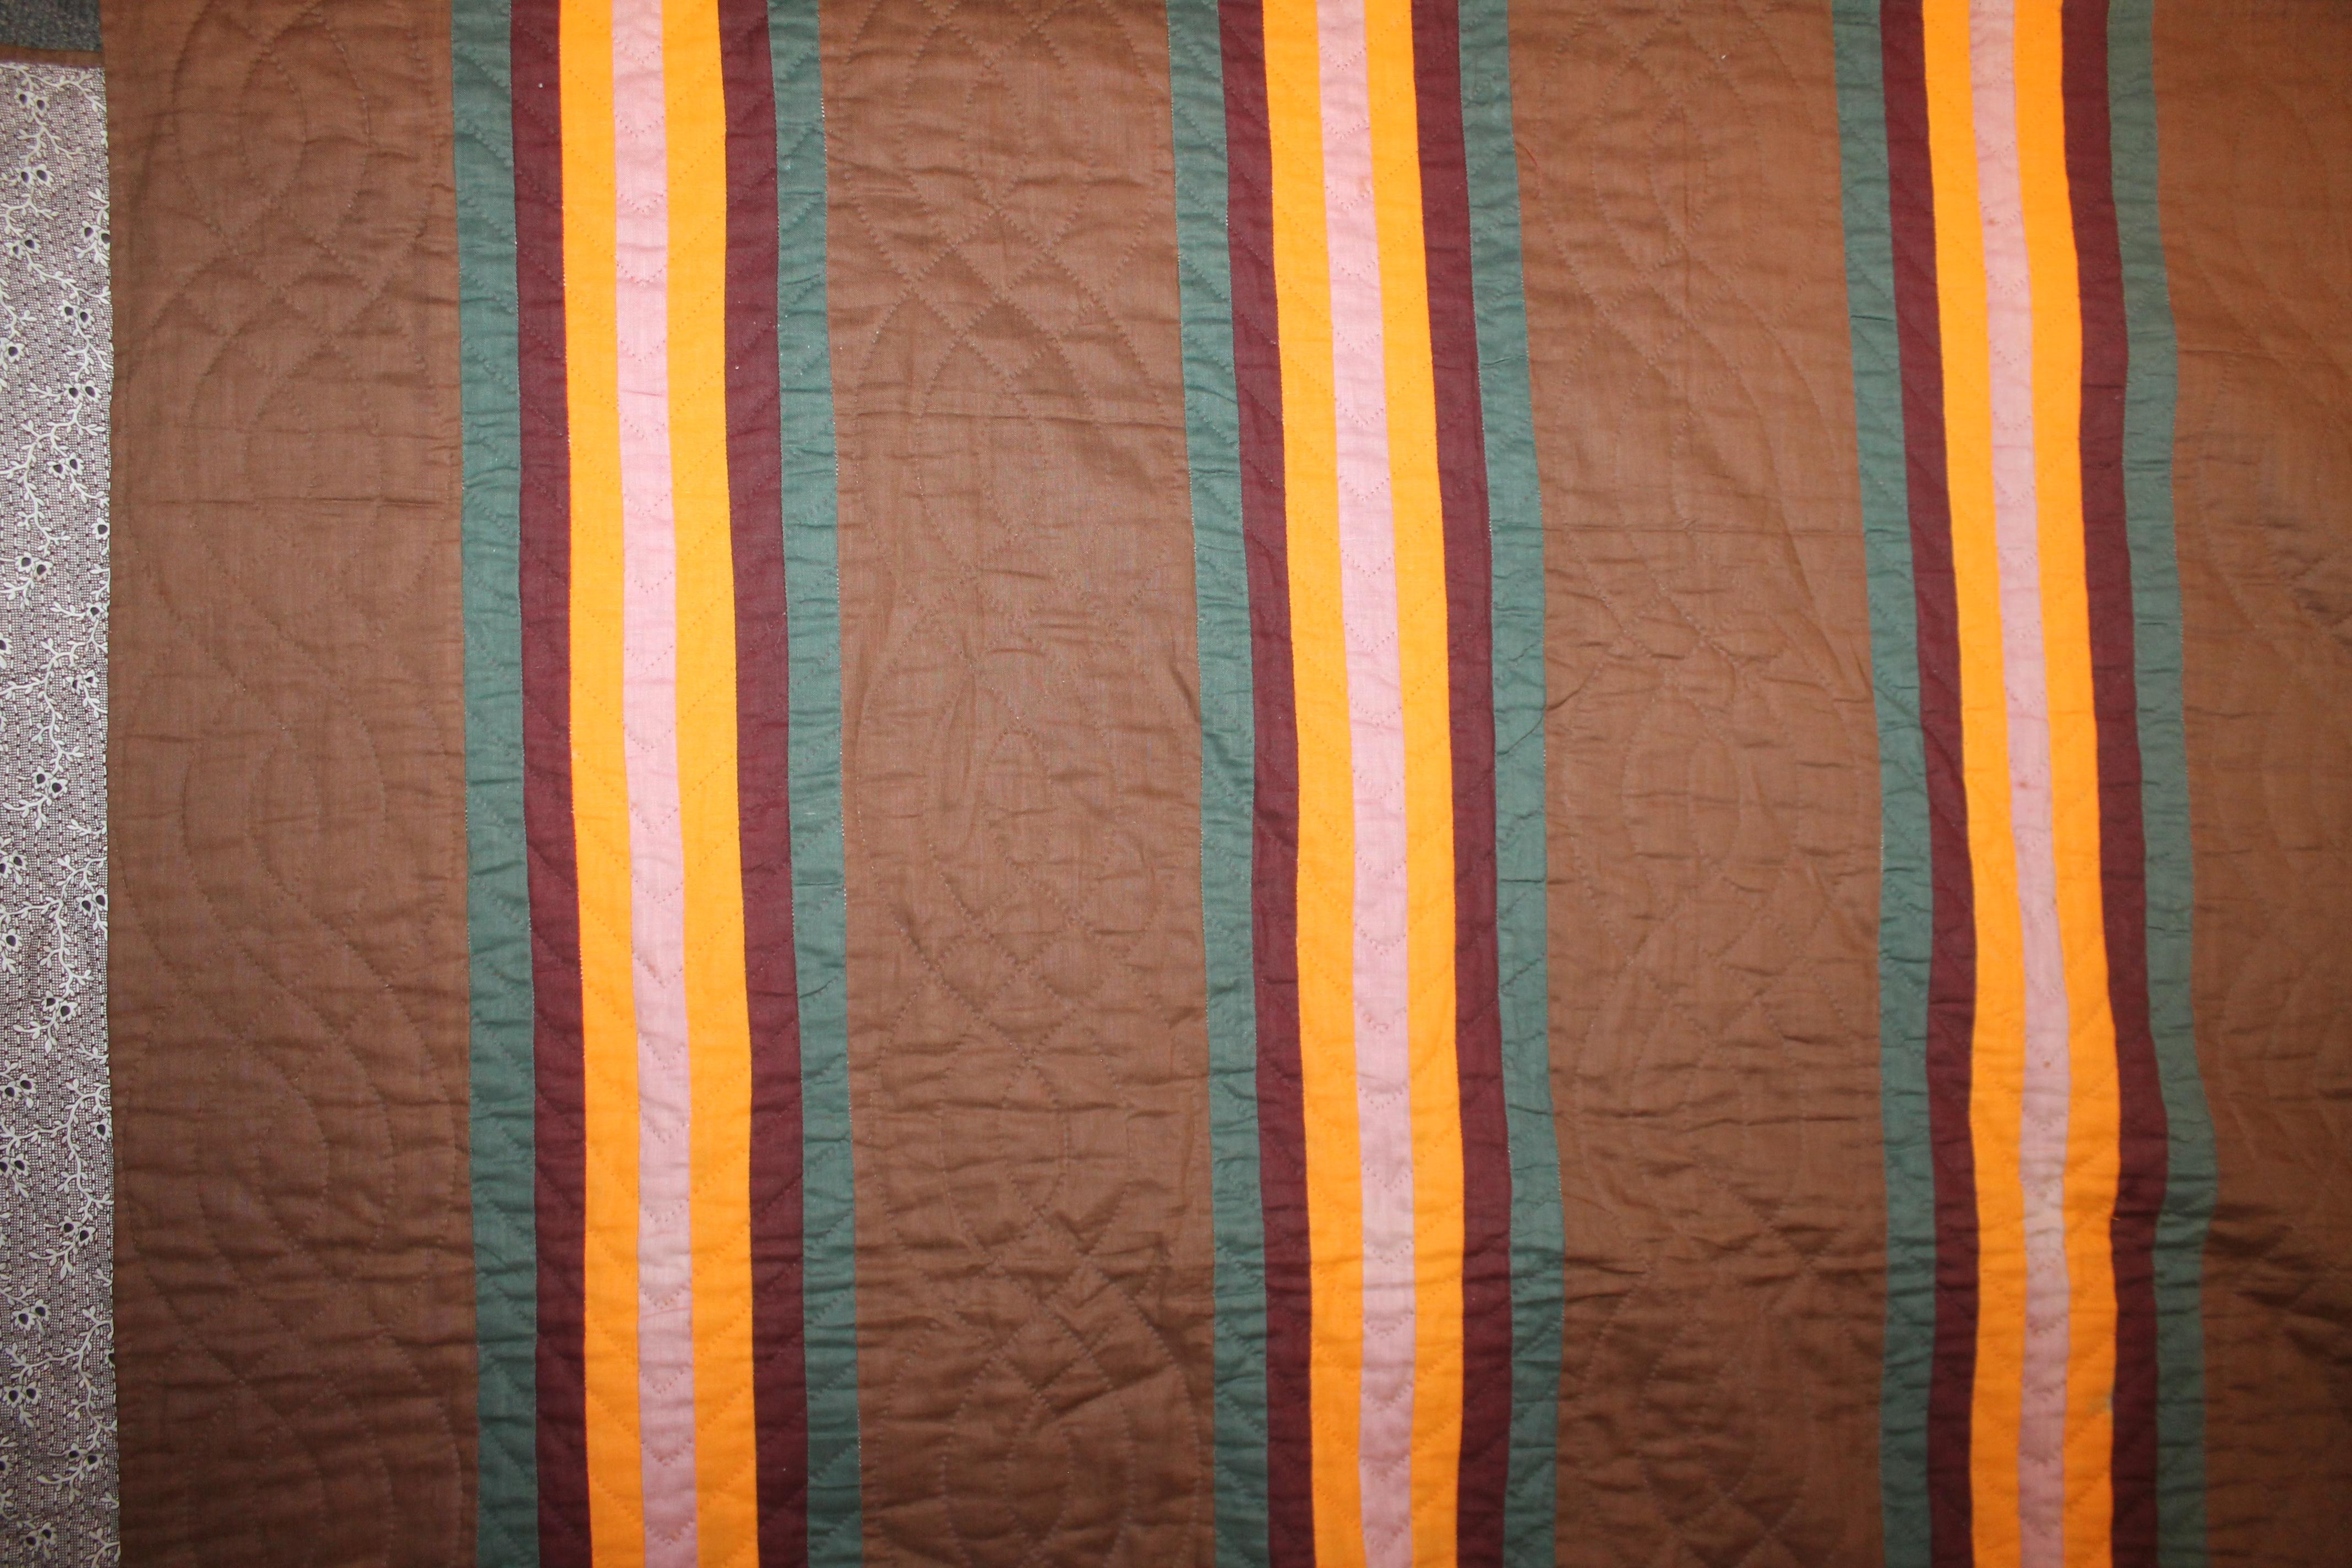 This fine split bars quilt was made in Lancaster County, Pennsylvania and is from the third quarter of the 19th century. It is quite rare the colors on a chocolate brown ground. It is in very good condition. These quilts were typically made in that